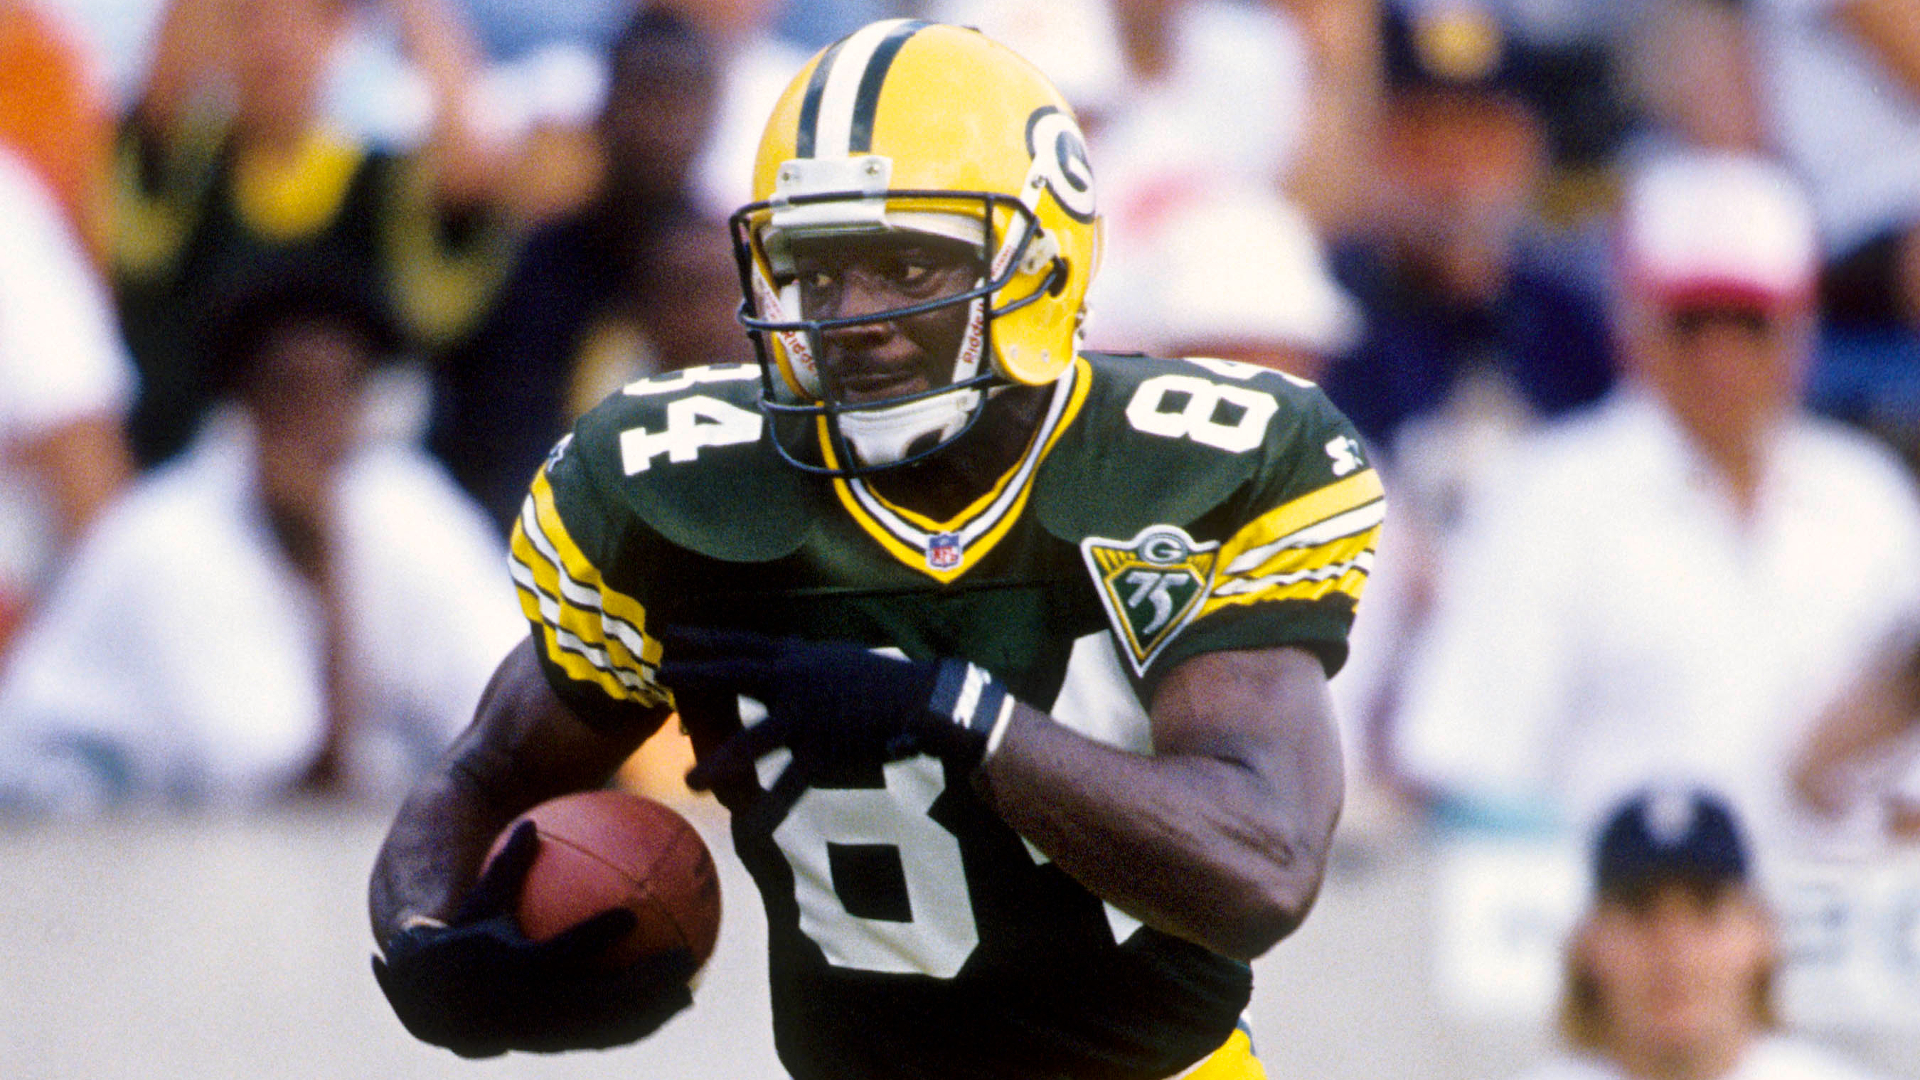 sterling sharpe packers